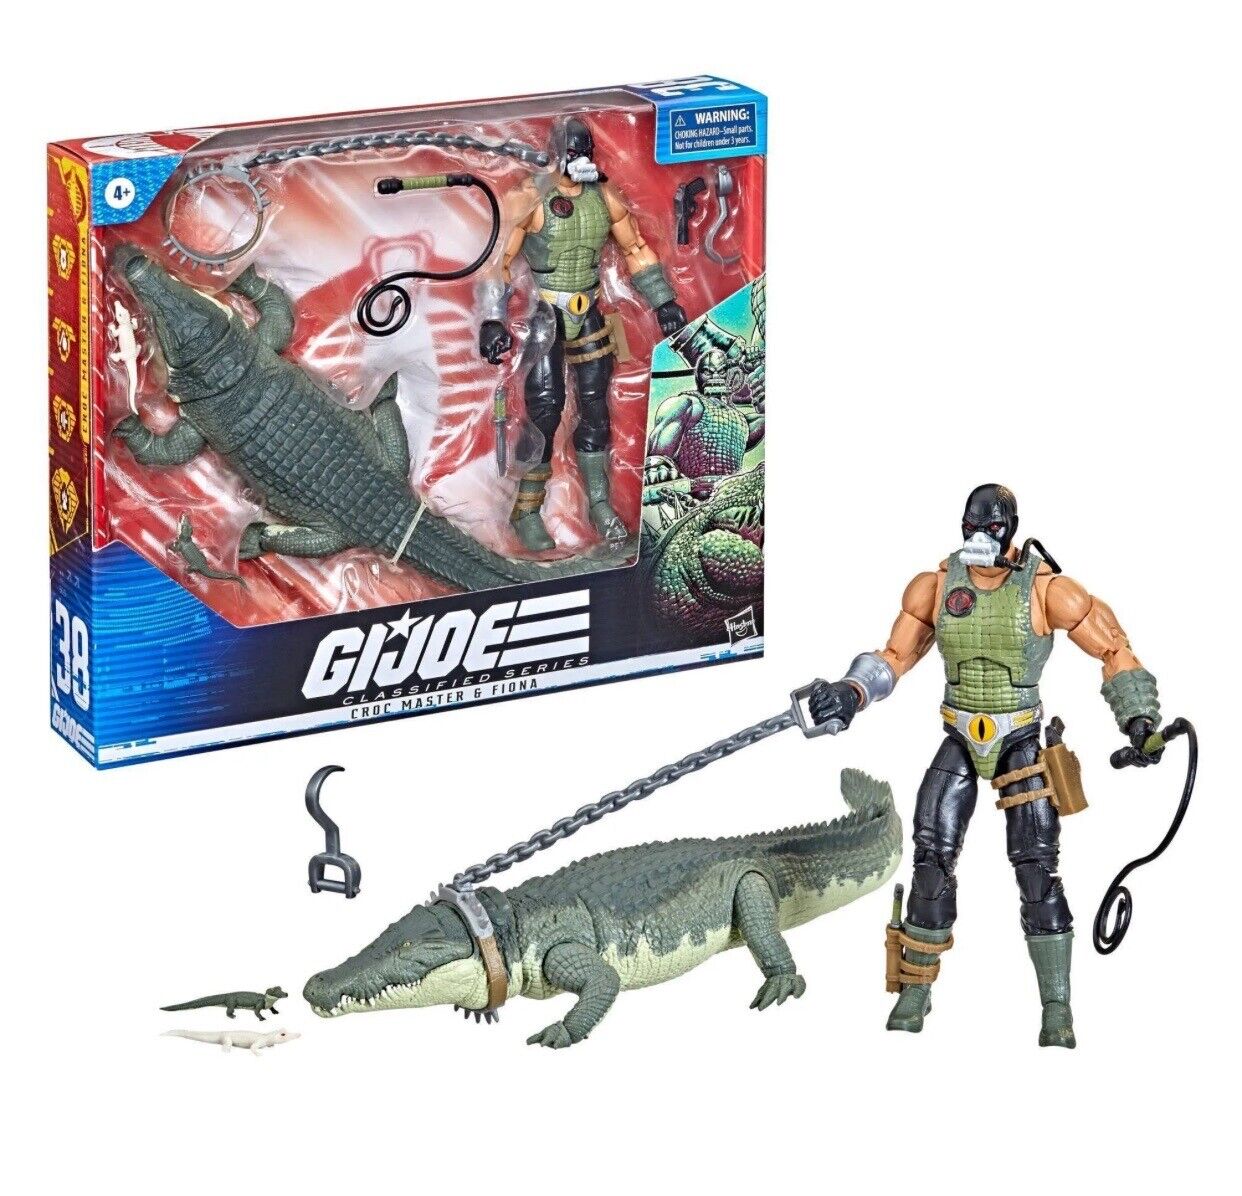 G.I. Joe Classified Series Croc Master & Fiona Action Figures 38 Collectible Premium Toys With Accessories 6-Inch